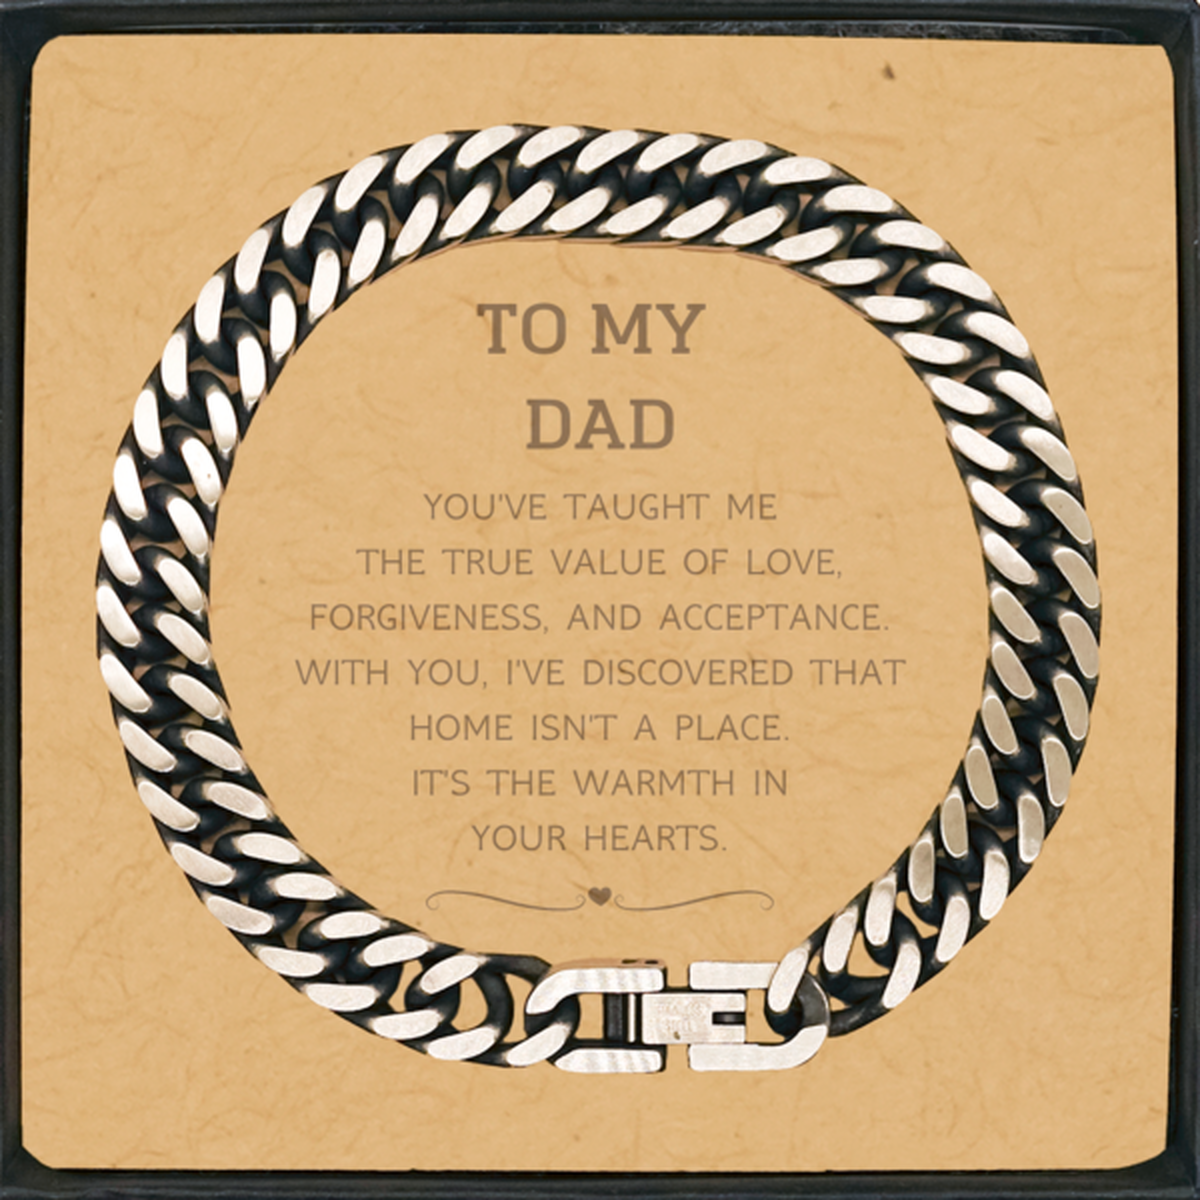 To My Dad Gifts, You've taught me the true value of love, Thank You Gifts For Dad, Birthday Cuban Link Chain Bracelet For Dad